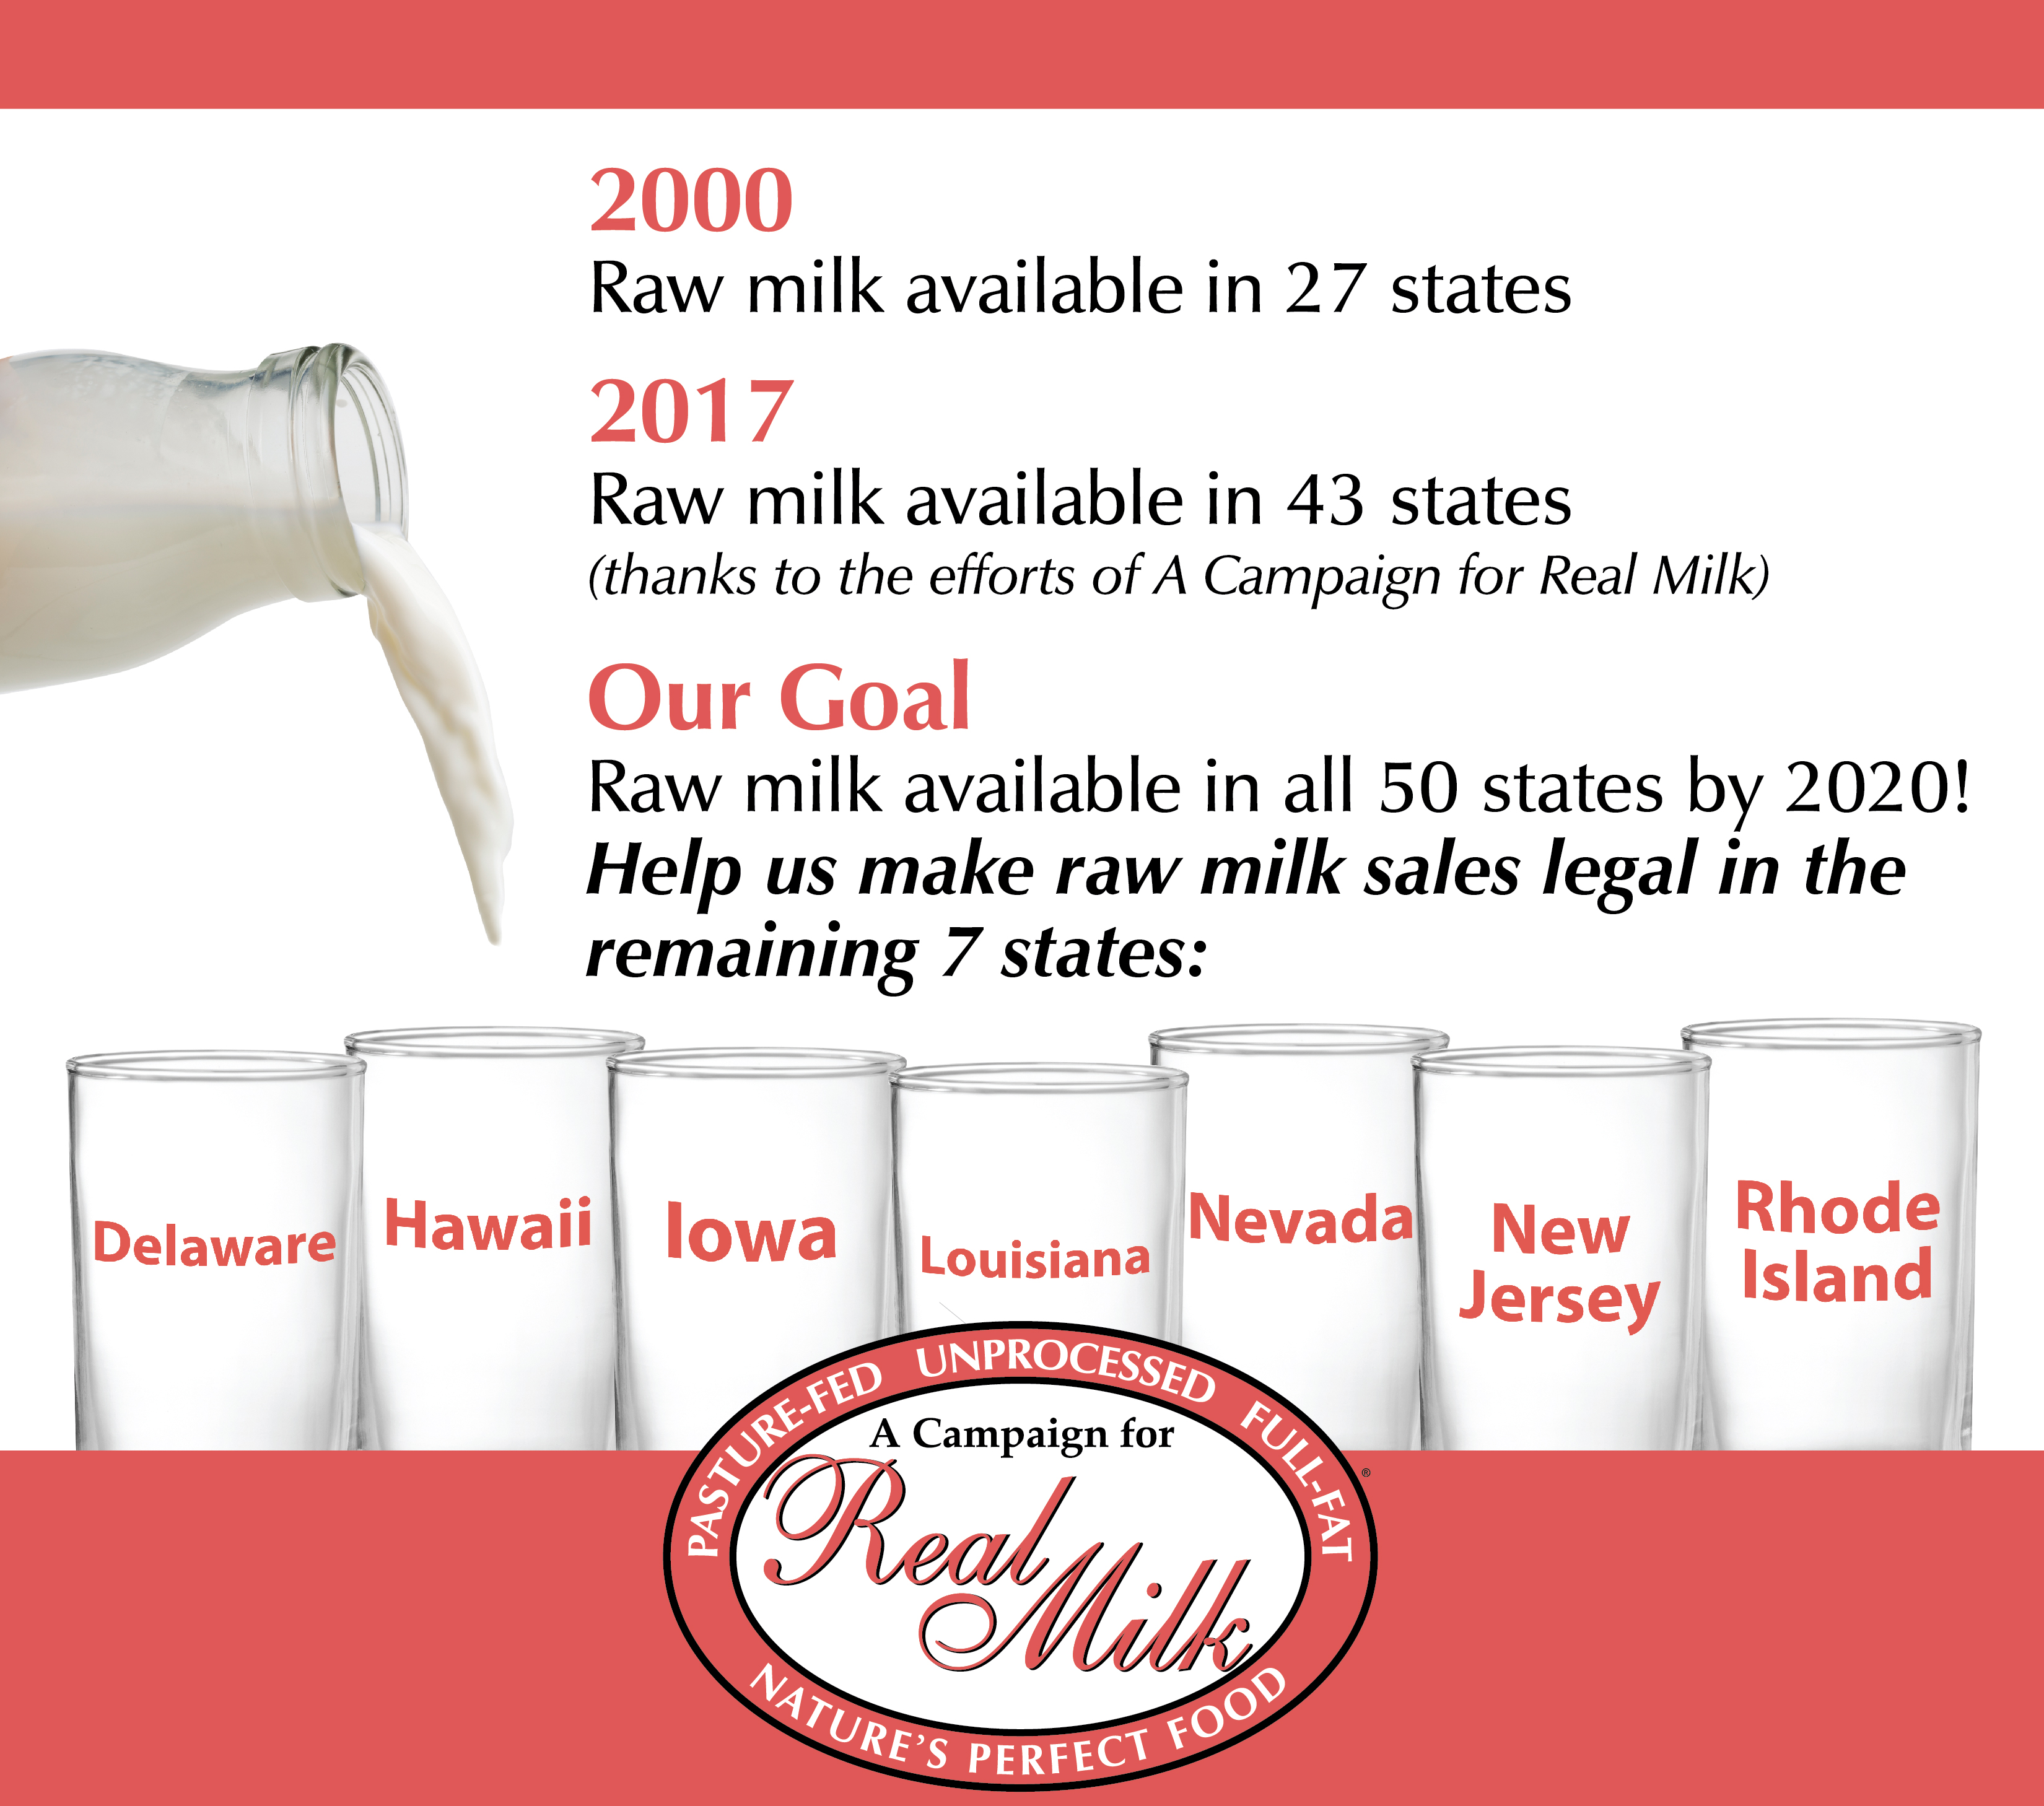 Do not eat advisory issued for Michigan dairy farm's illegal sale of raw  milk 